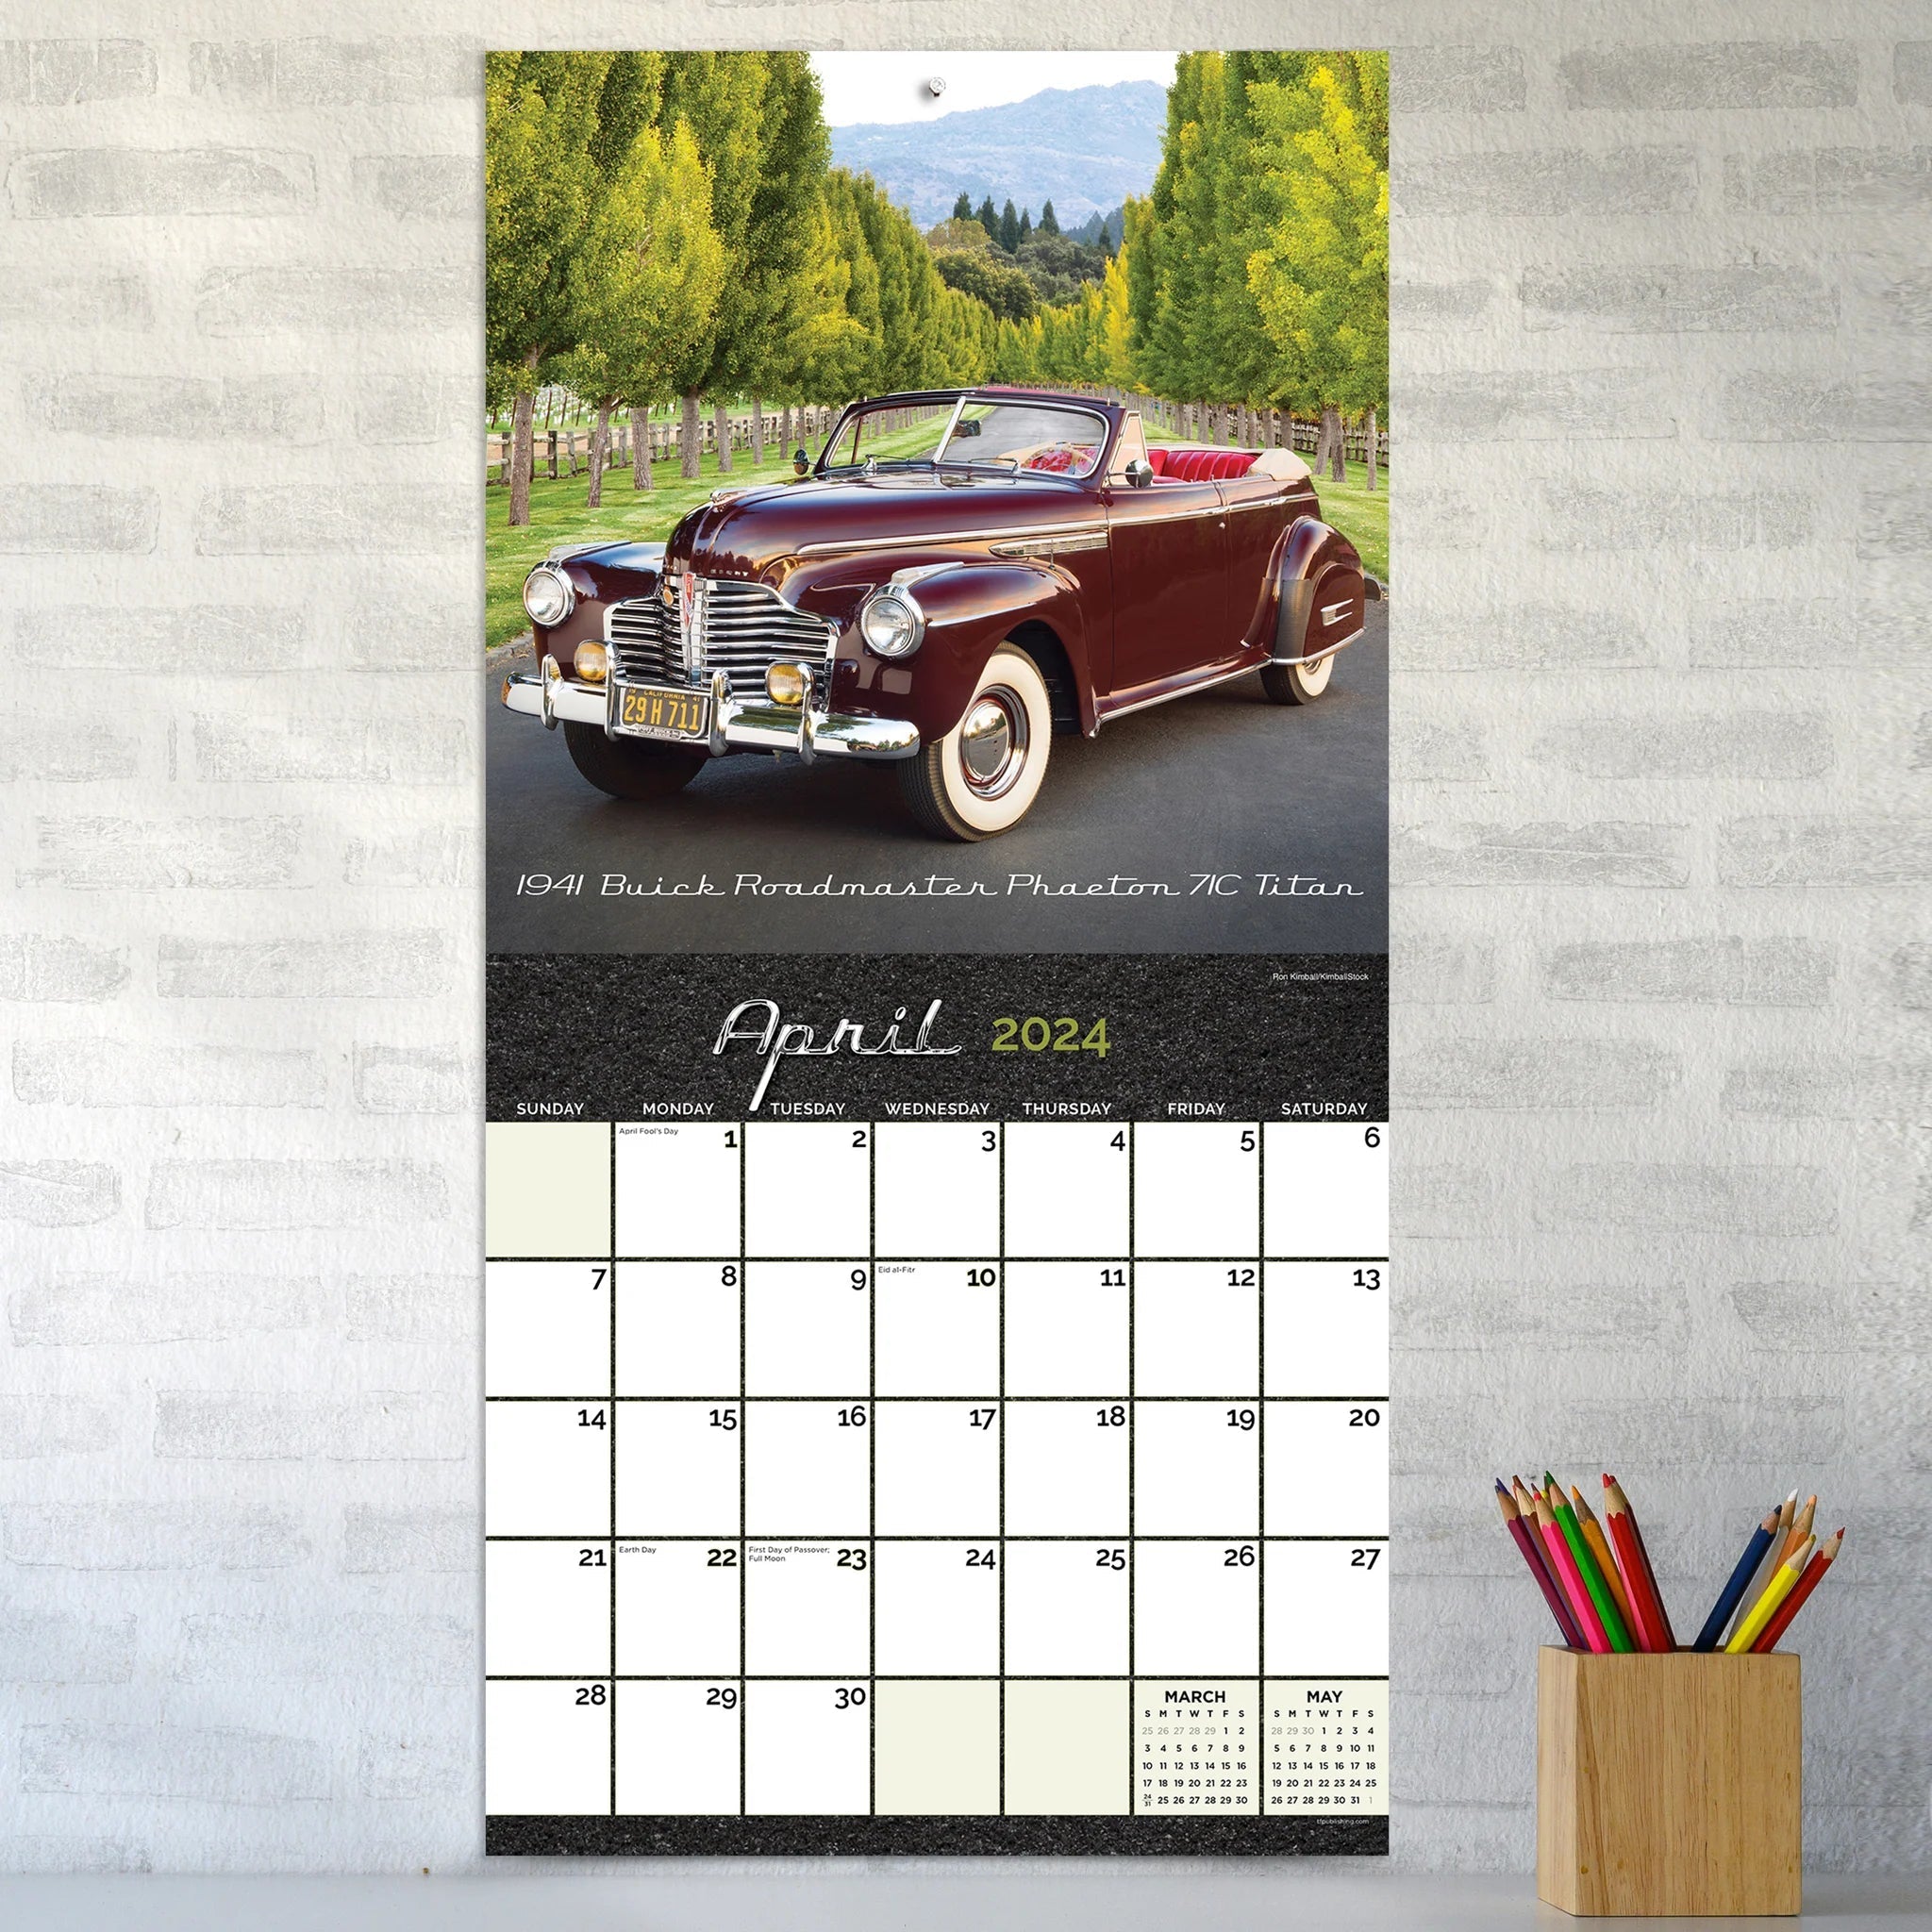 2024 Classic Cars (by TF Publishing) - Square Wall Calendar